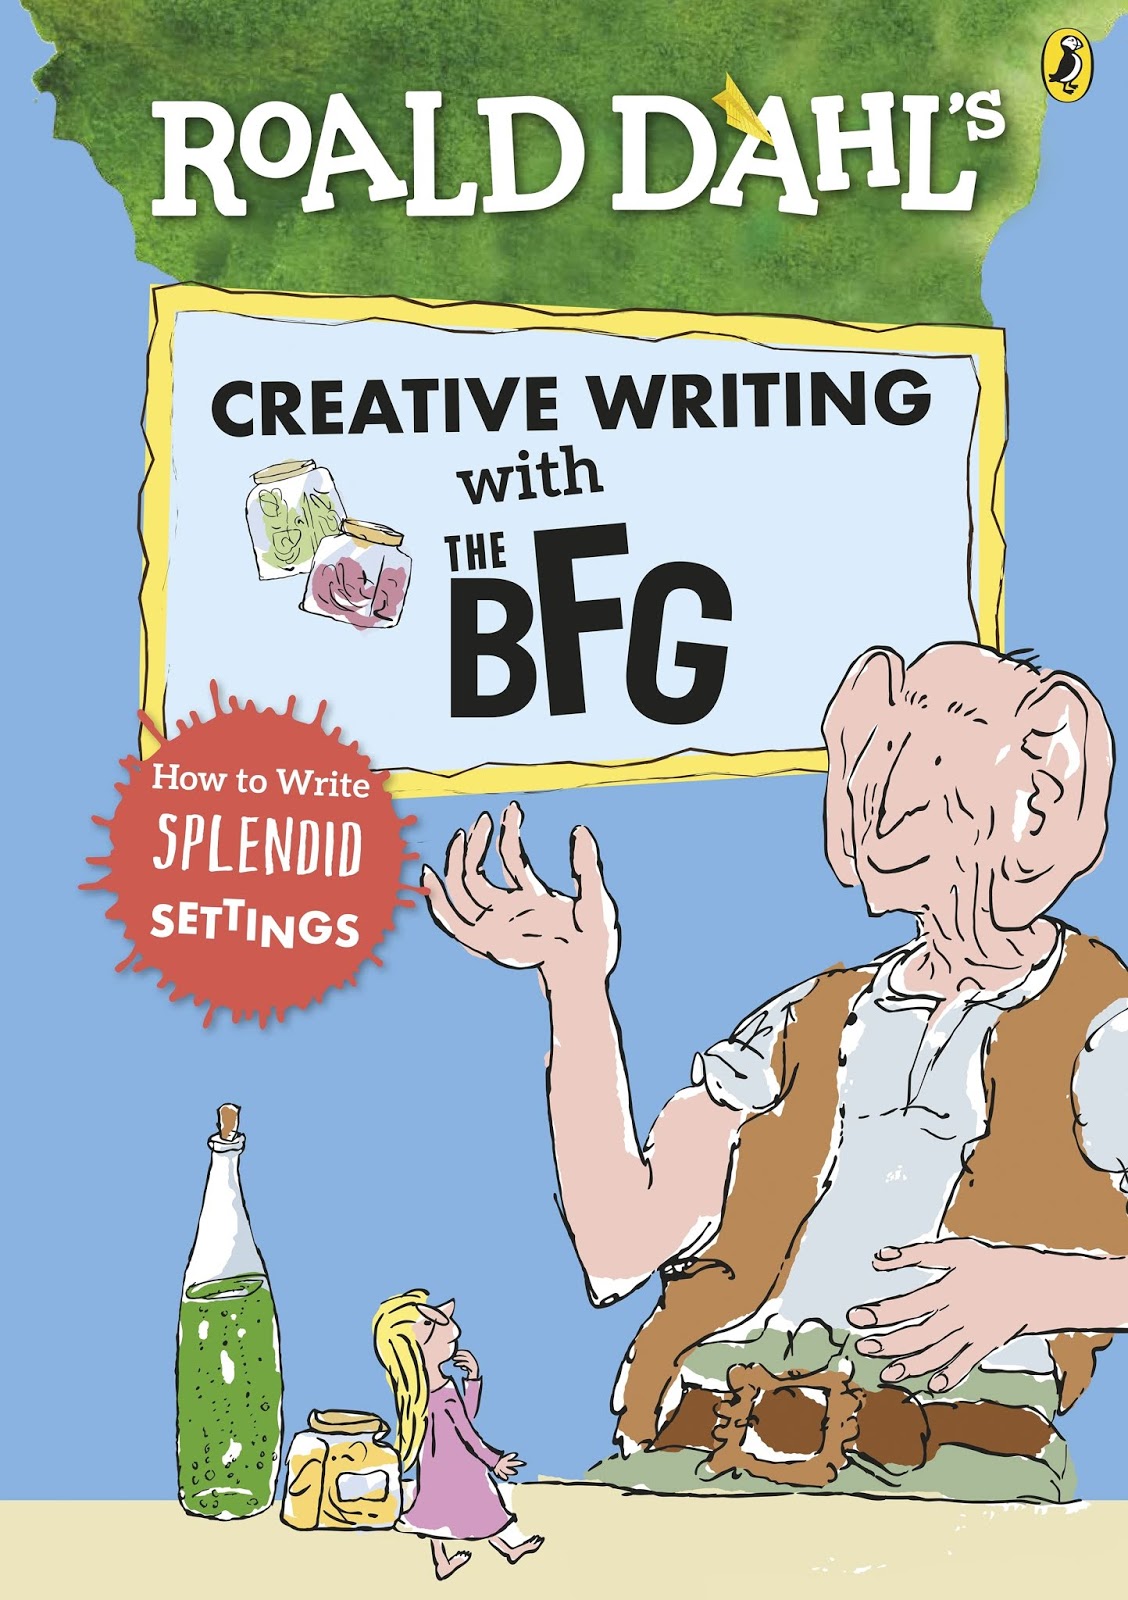 book review of the bfg by roald dahl